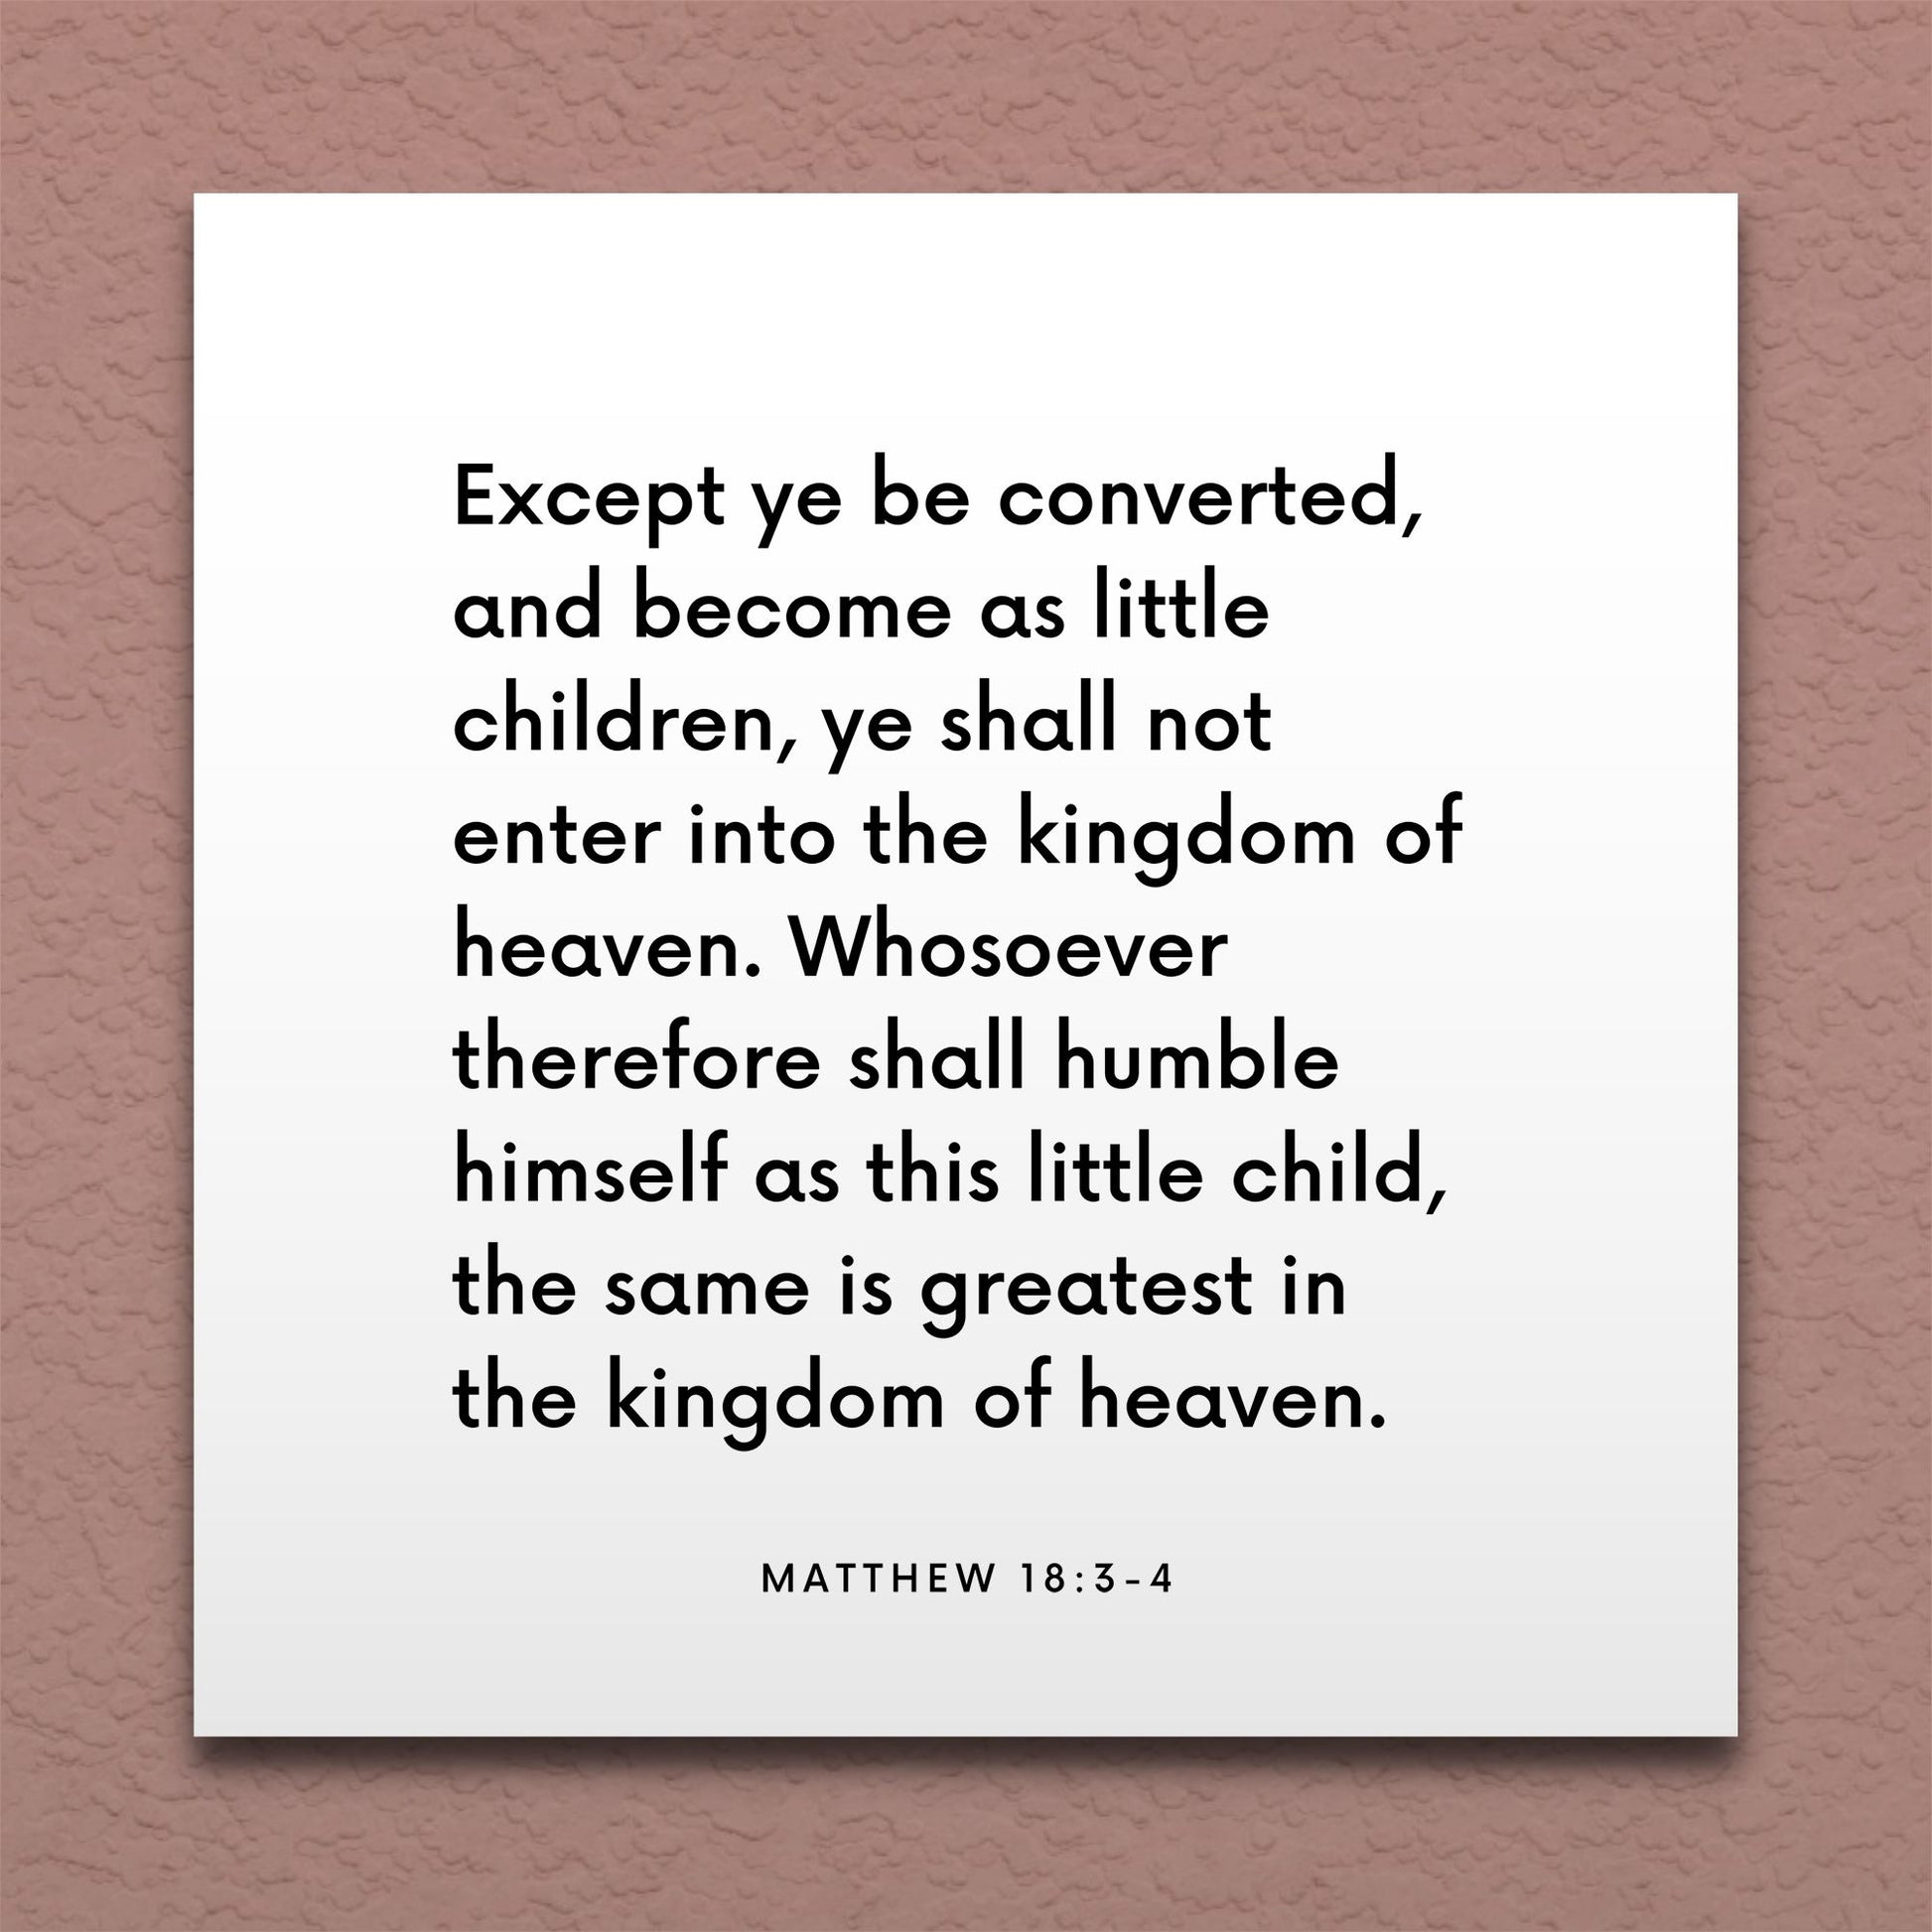 Wall-mounted scripture tile for Matthew 18:3-4 - "Except ye be converted, and become as little children"